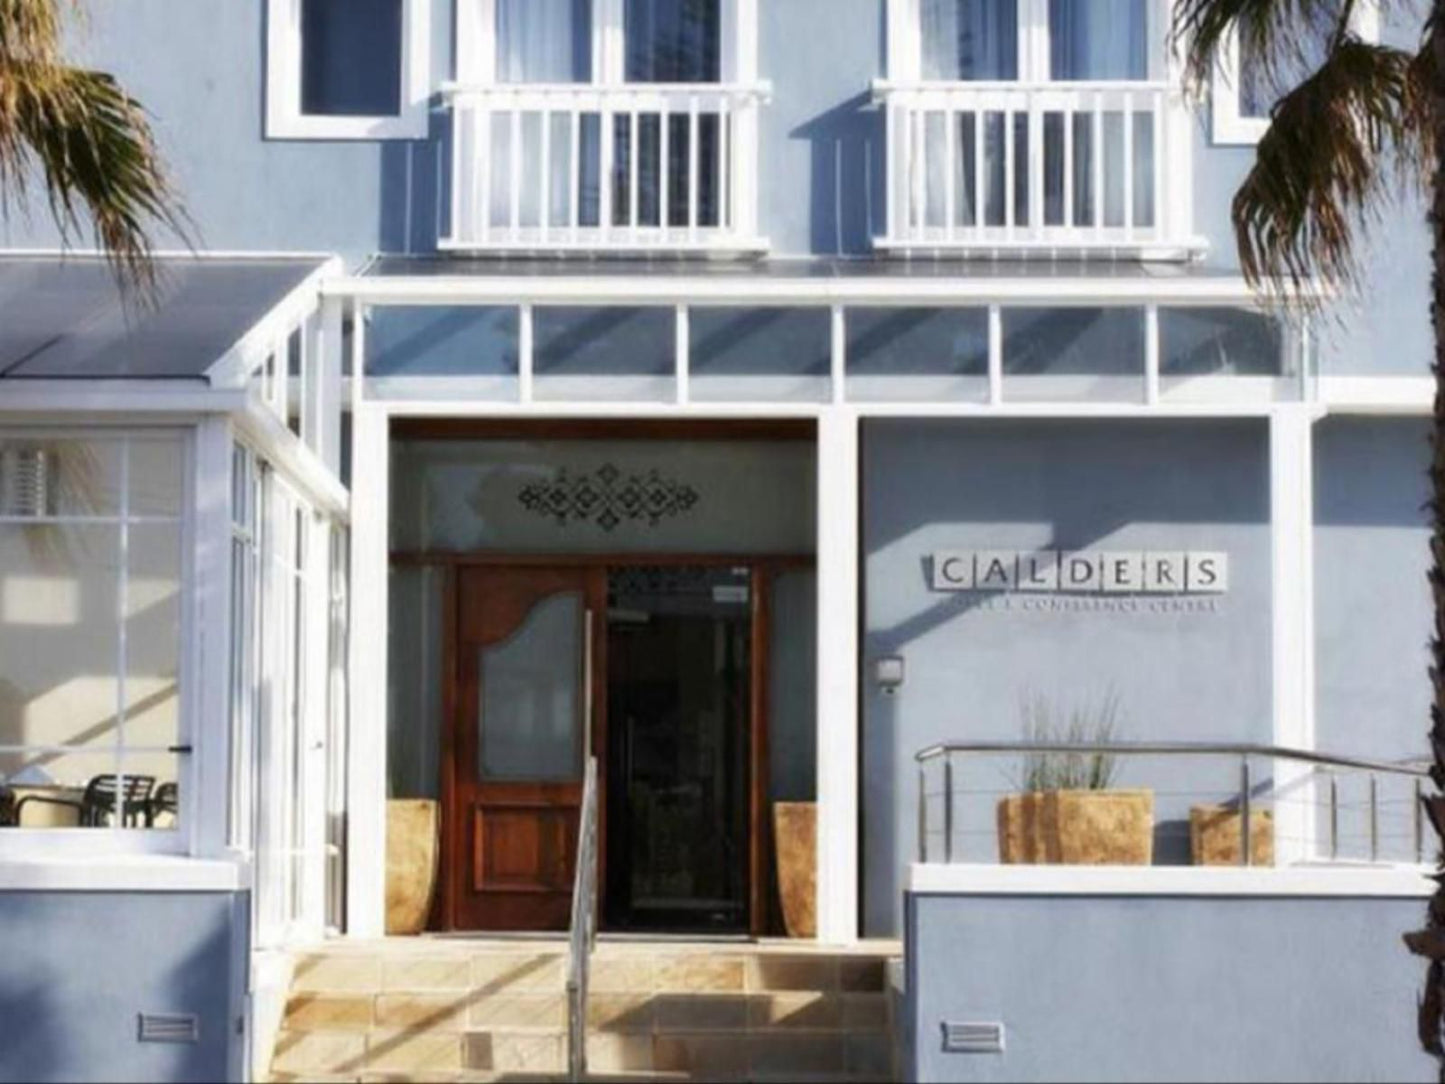 Calders Hotel Fish Hoek Cape Town Western Cape South Africa House, Building, Architecture